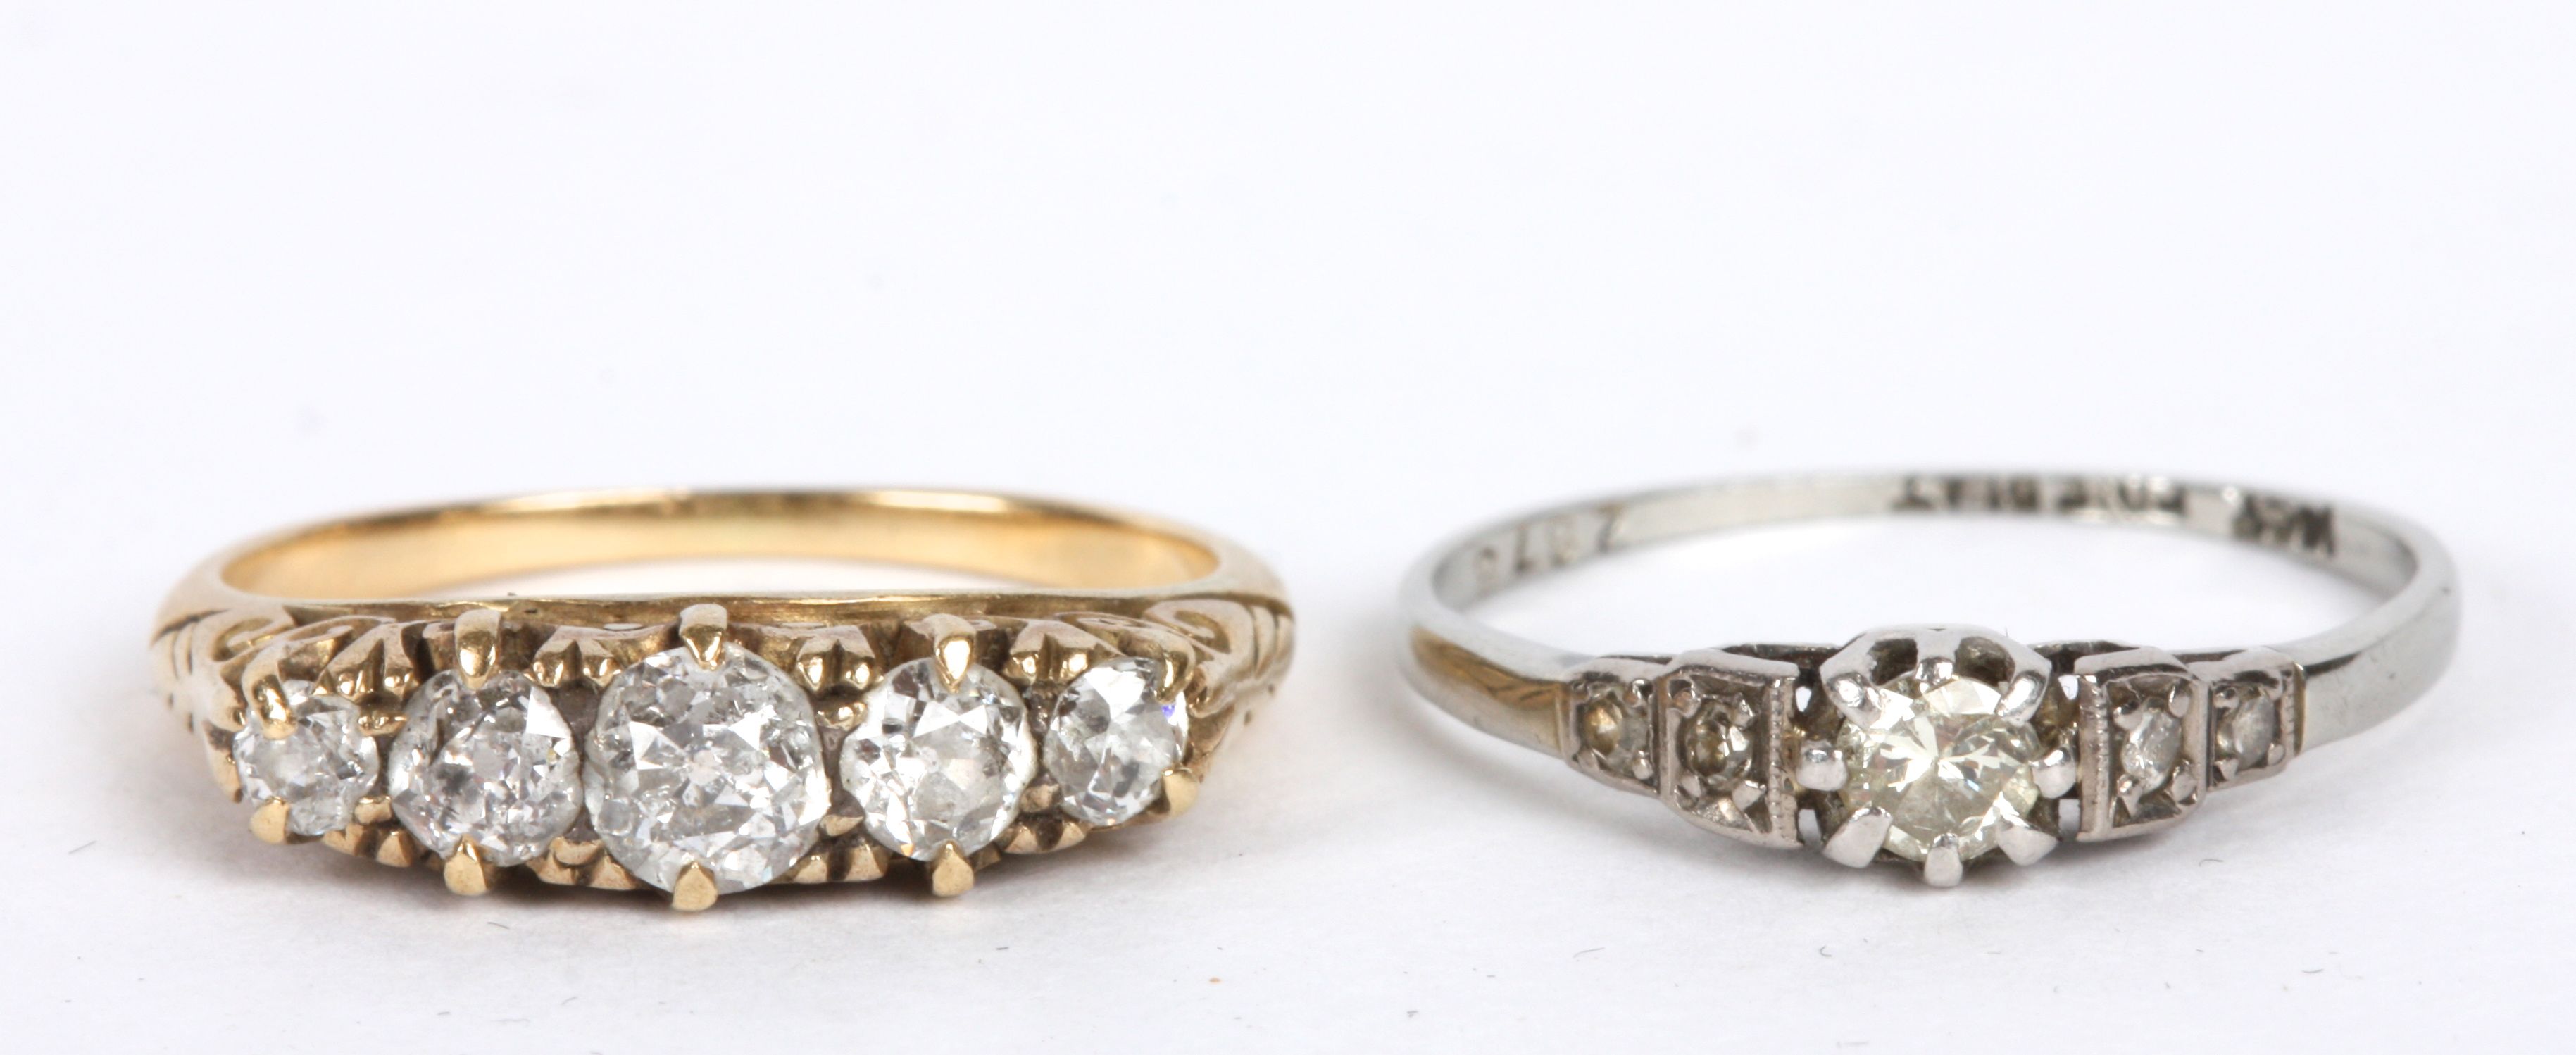 A five stone diamond set half hoop ring with scroll detail to mount (tests gold) and a delicate